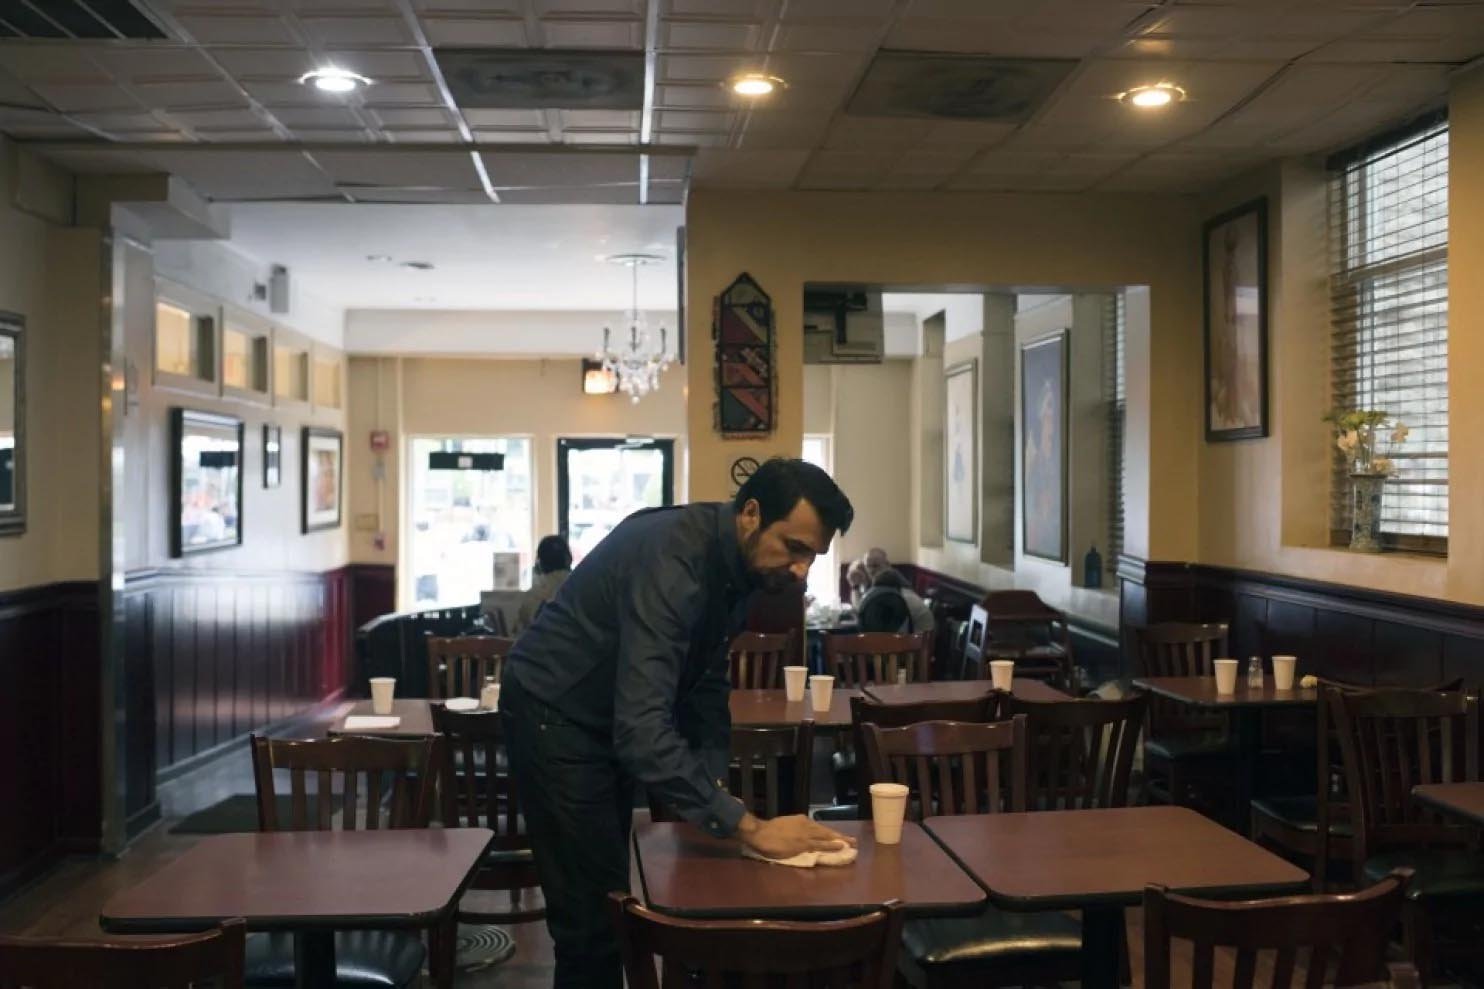 Kazi Mannan fills in as chef, waiter and busboy when he is short-staffed.